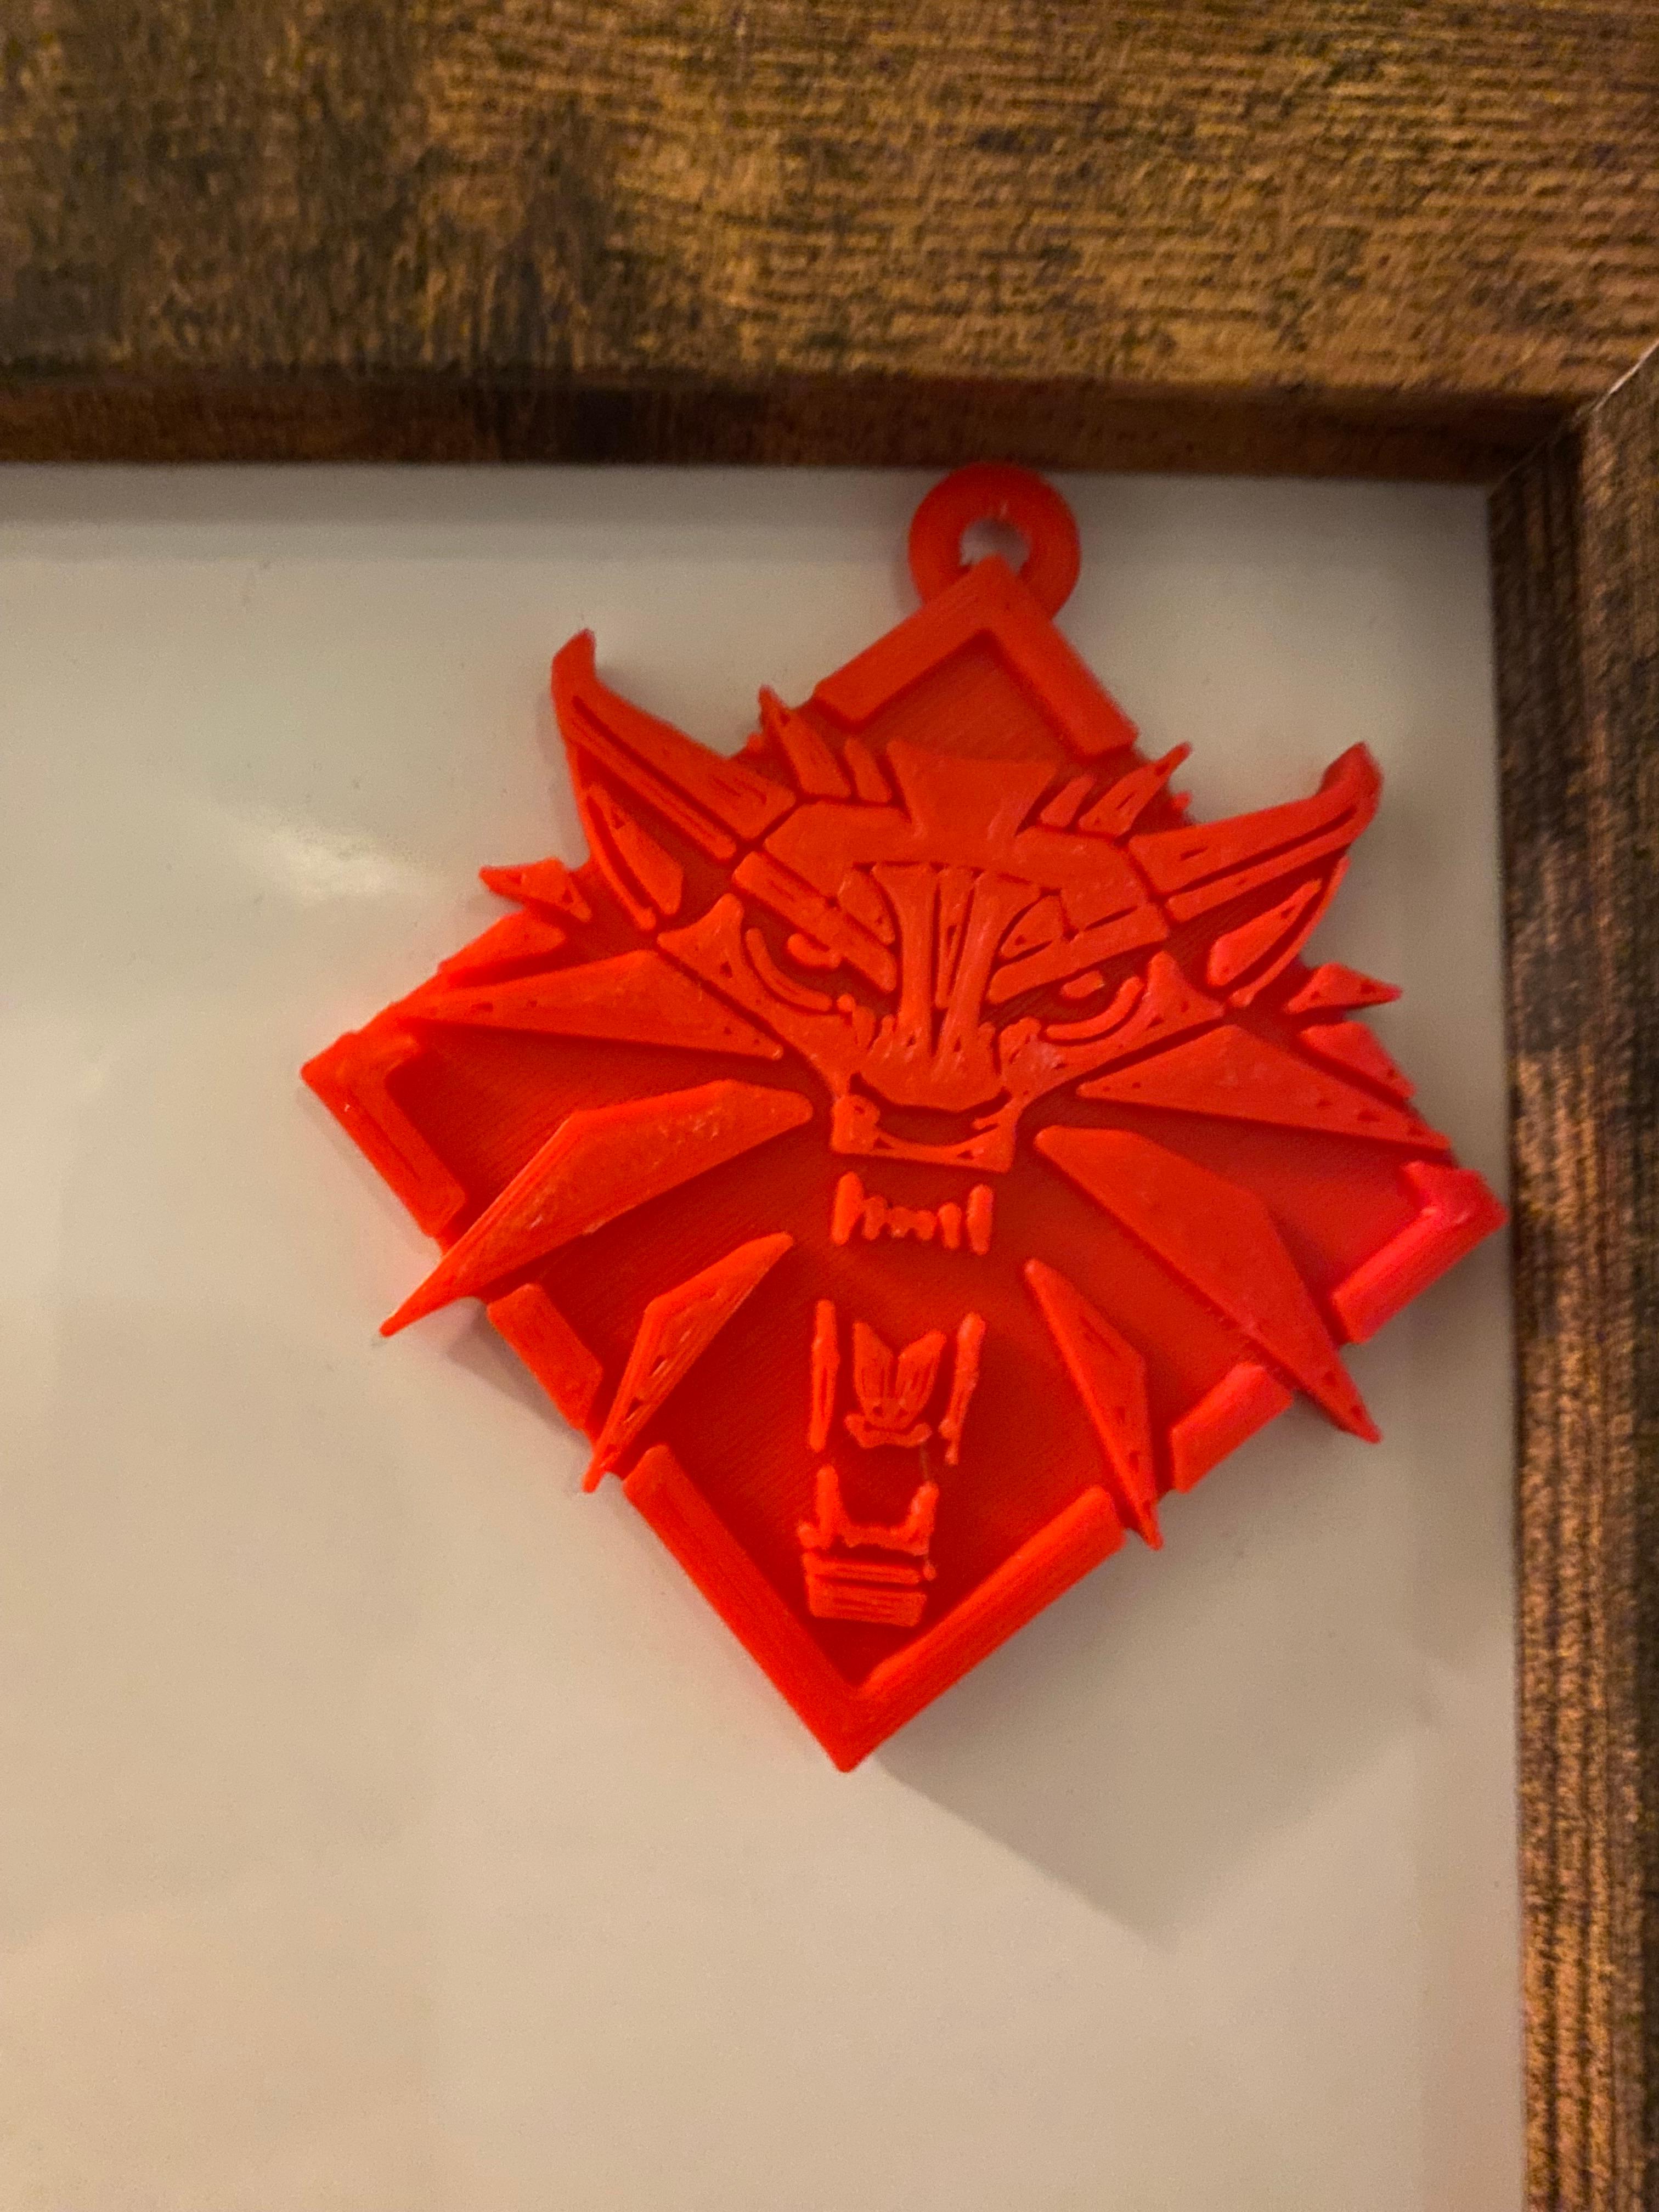 The Witcher key chain, earring, dogtag, jewlery - This now protects the family whiteboard from monsters. - 3d model